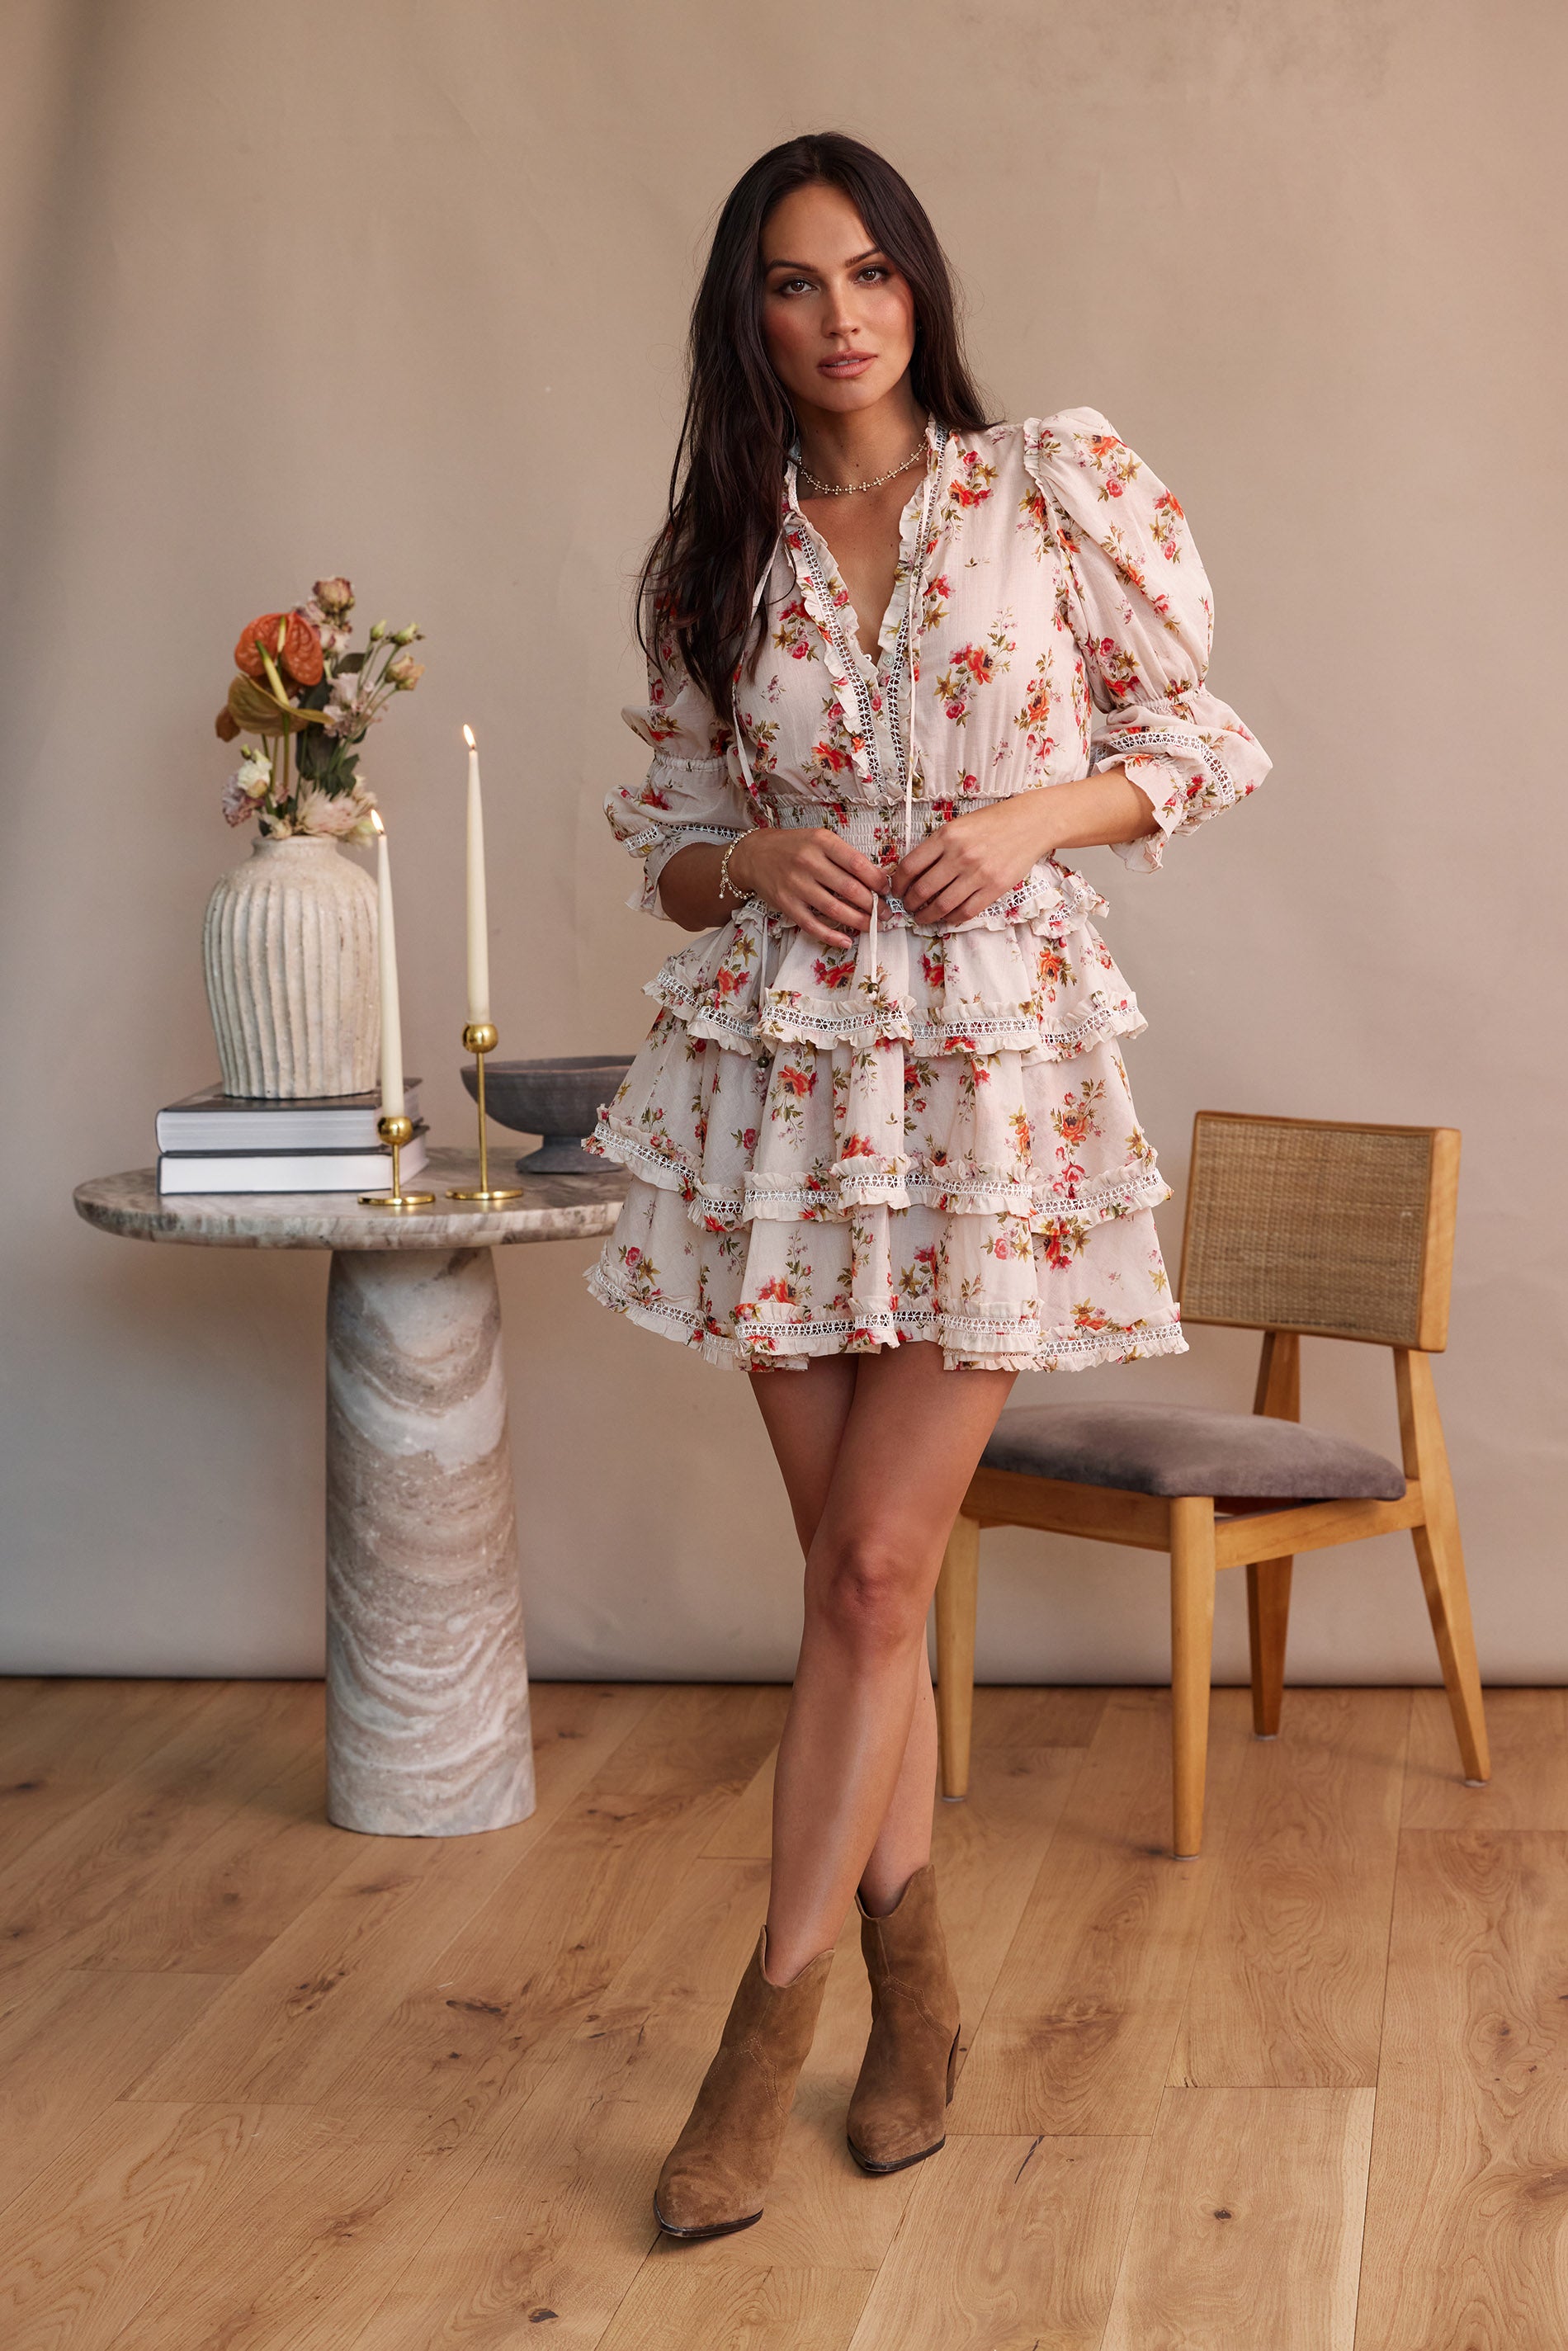 The Daisy Dress in Natural Dainty Floral – V. Chapman